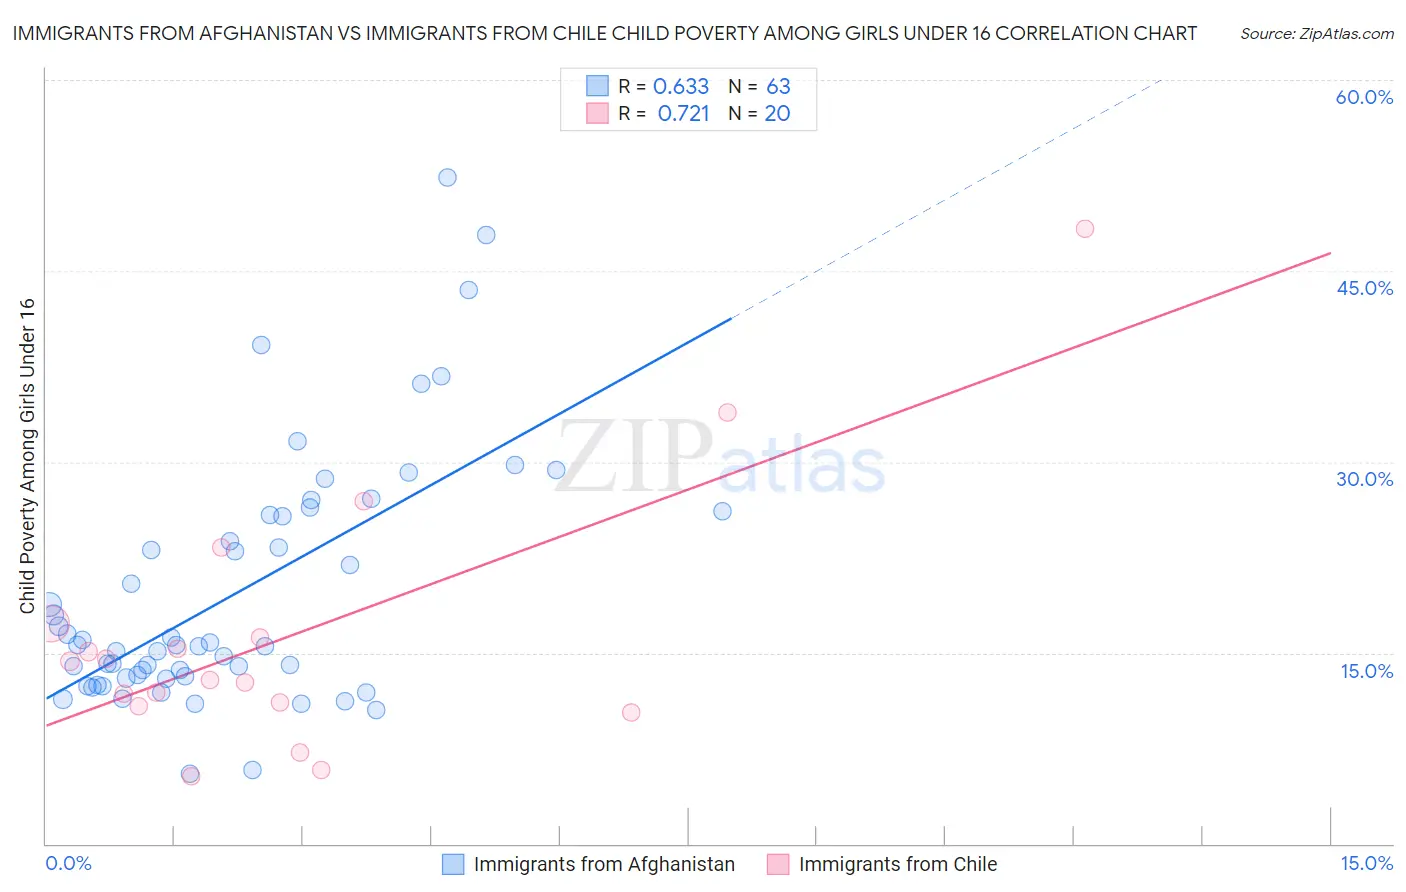 Immigrants from Afghanistan vs Immigrants from Chile Child Poverty Among Girls Under 16